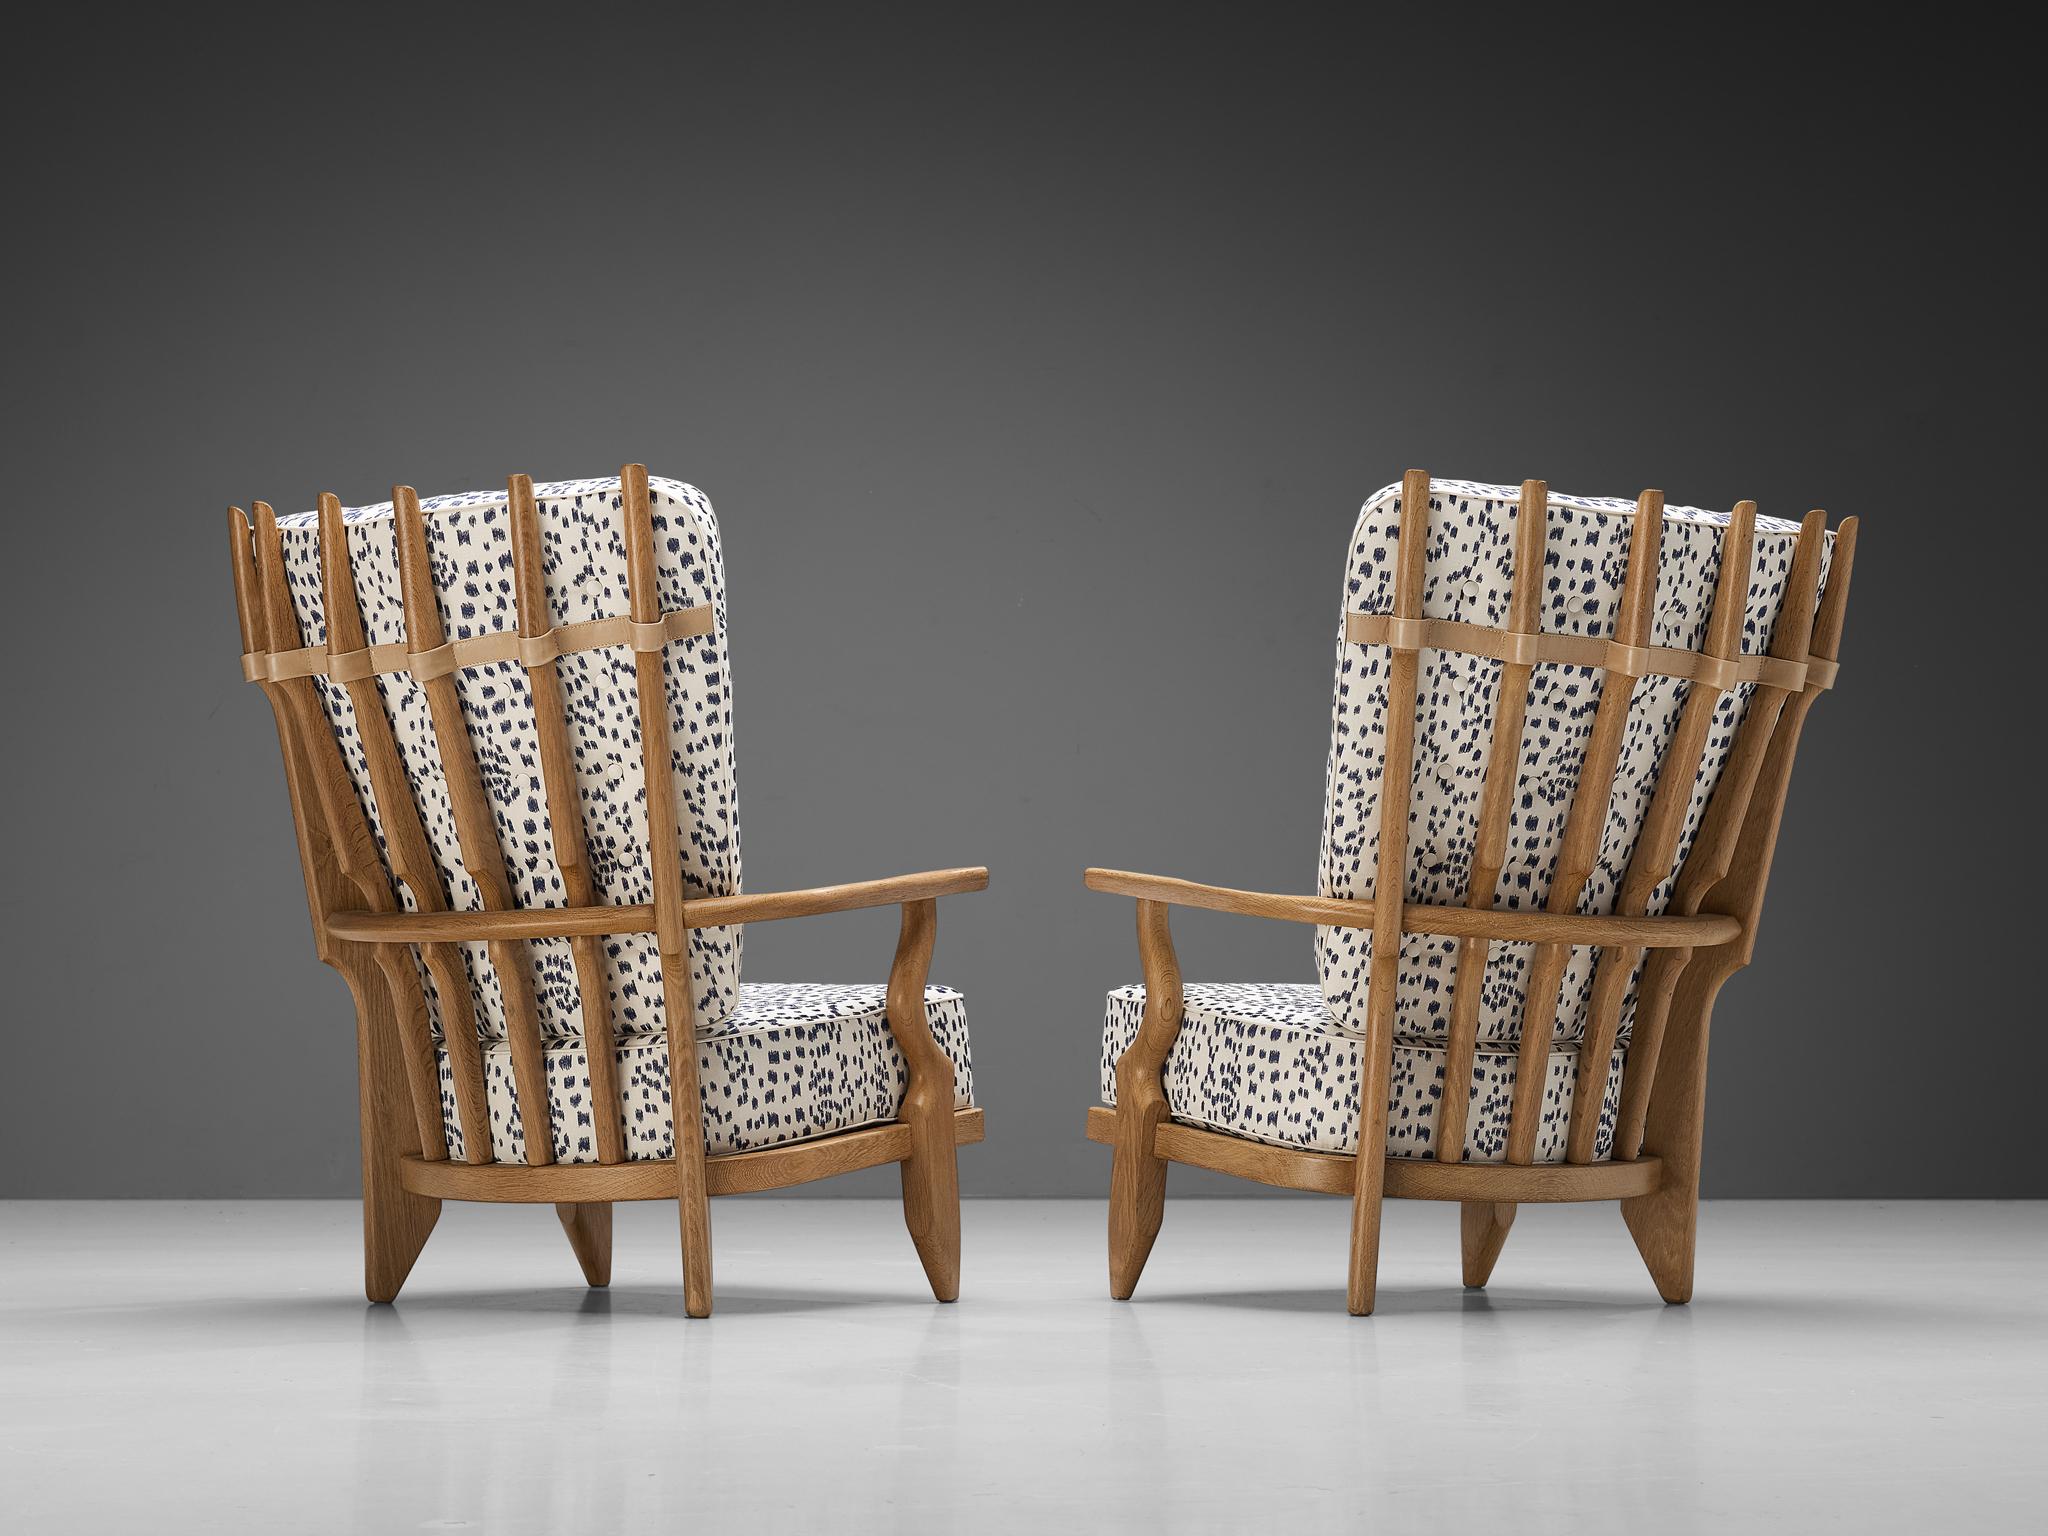 Guillerme et Chambron for Votre Maison, pair of 'Grand Repos' lounge chair oak, fabric, oak, France, 1960s.

Guillerme & Chambron are known for their high quality solid oak furniture, from which this is another great example. These chairs have an